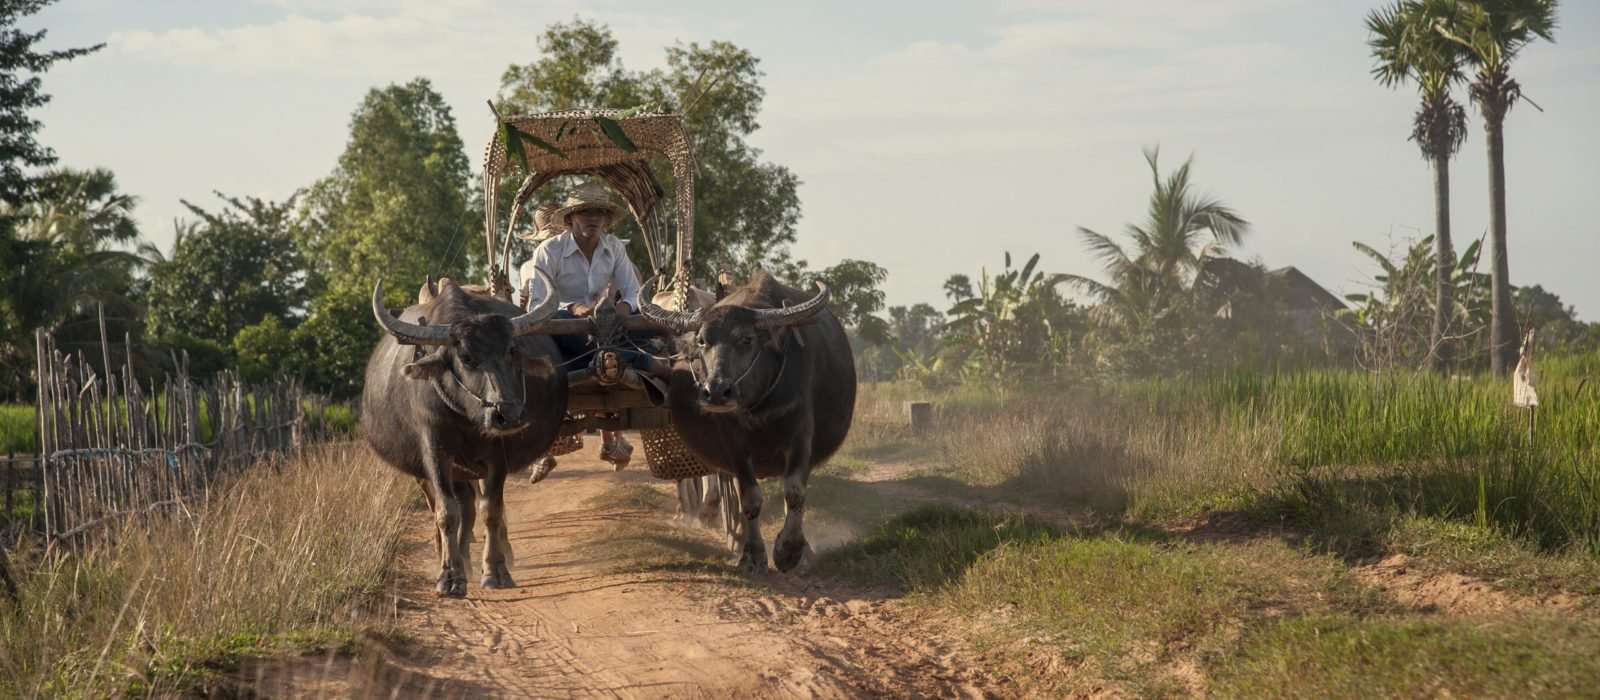 Cattle carriage Cambodia